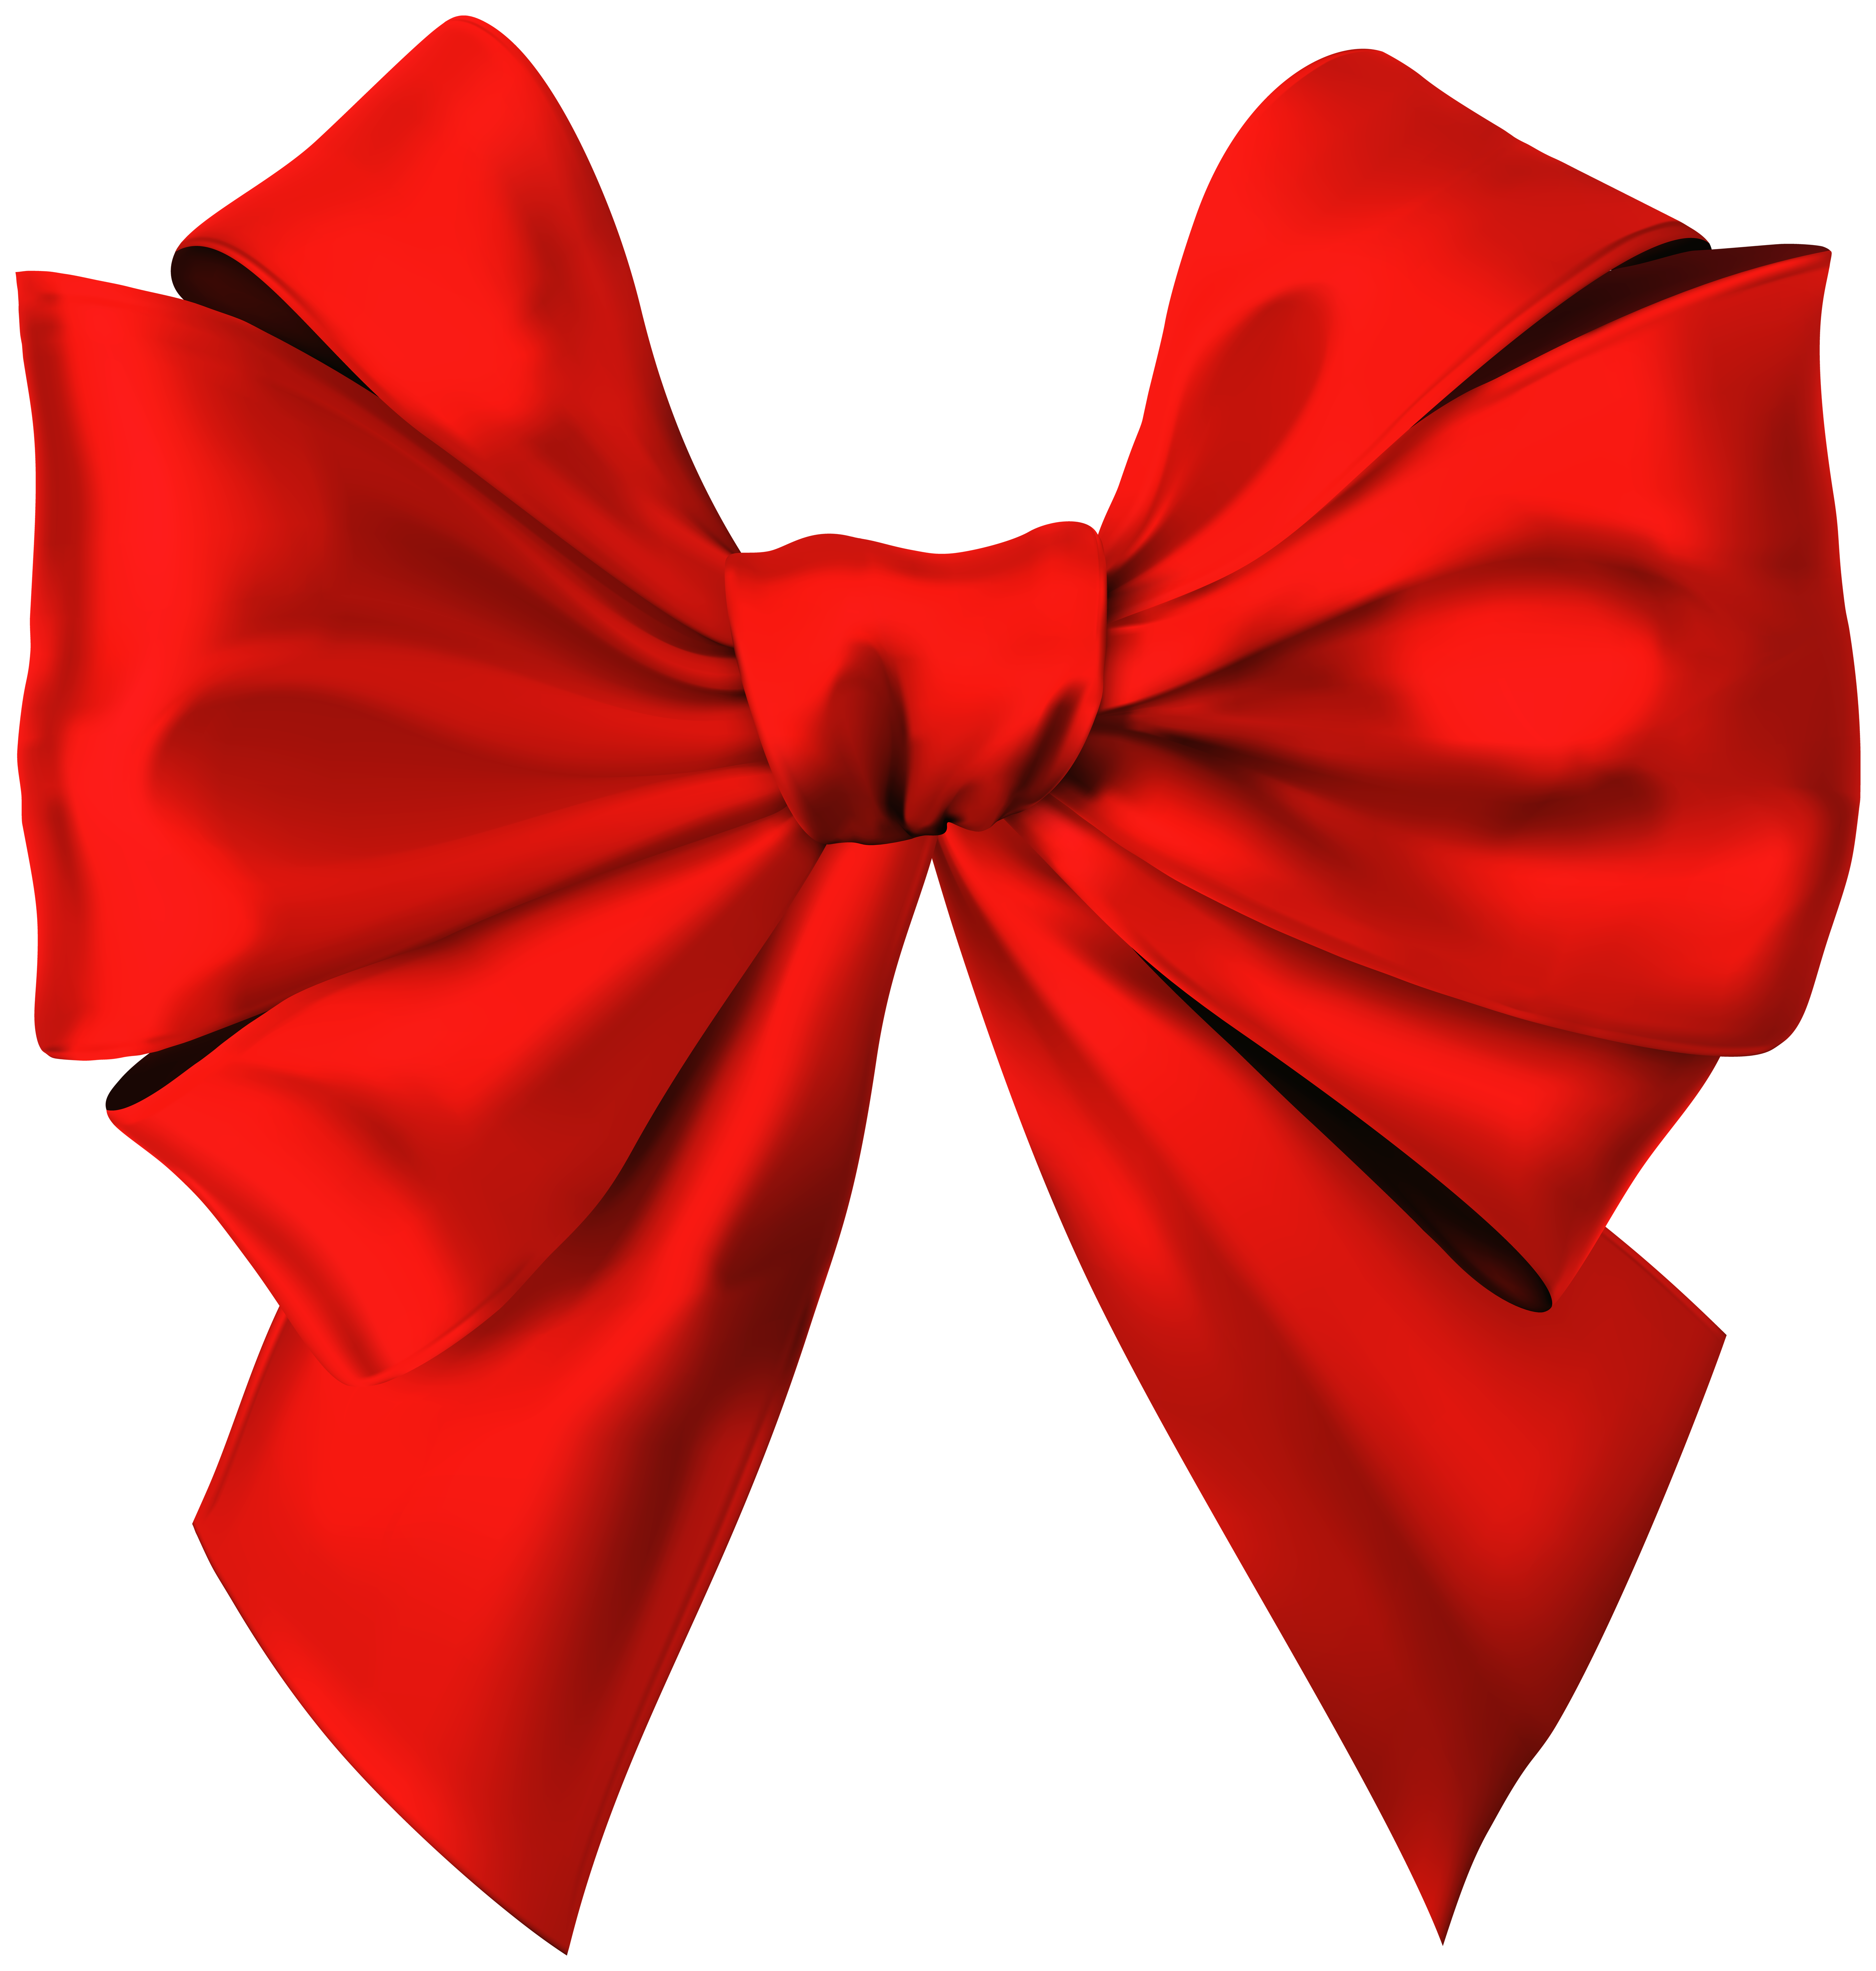 Red Bow Transparent Clip Art Image​, Gallery Yopriceville - High-Quality  Images and Transparent PNG Free Clipart